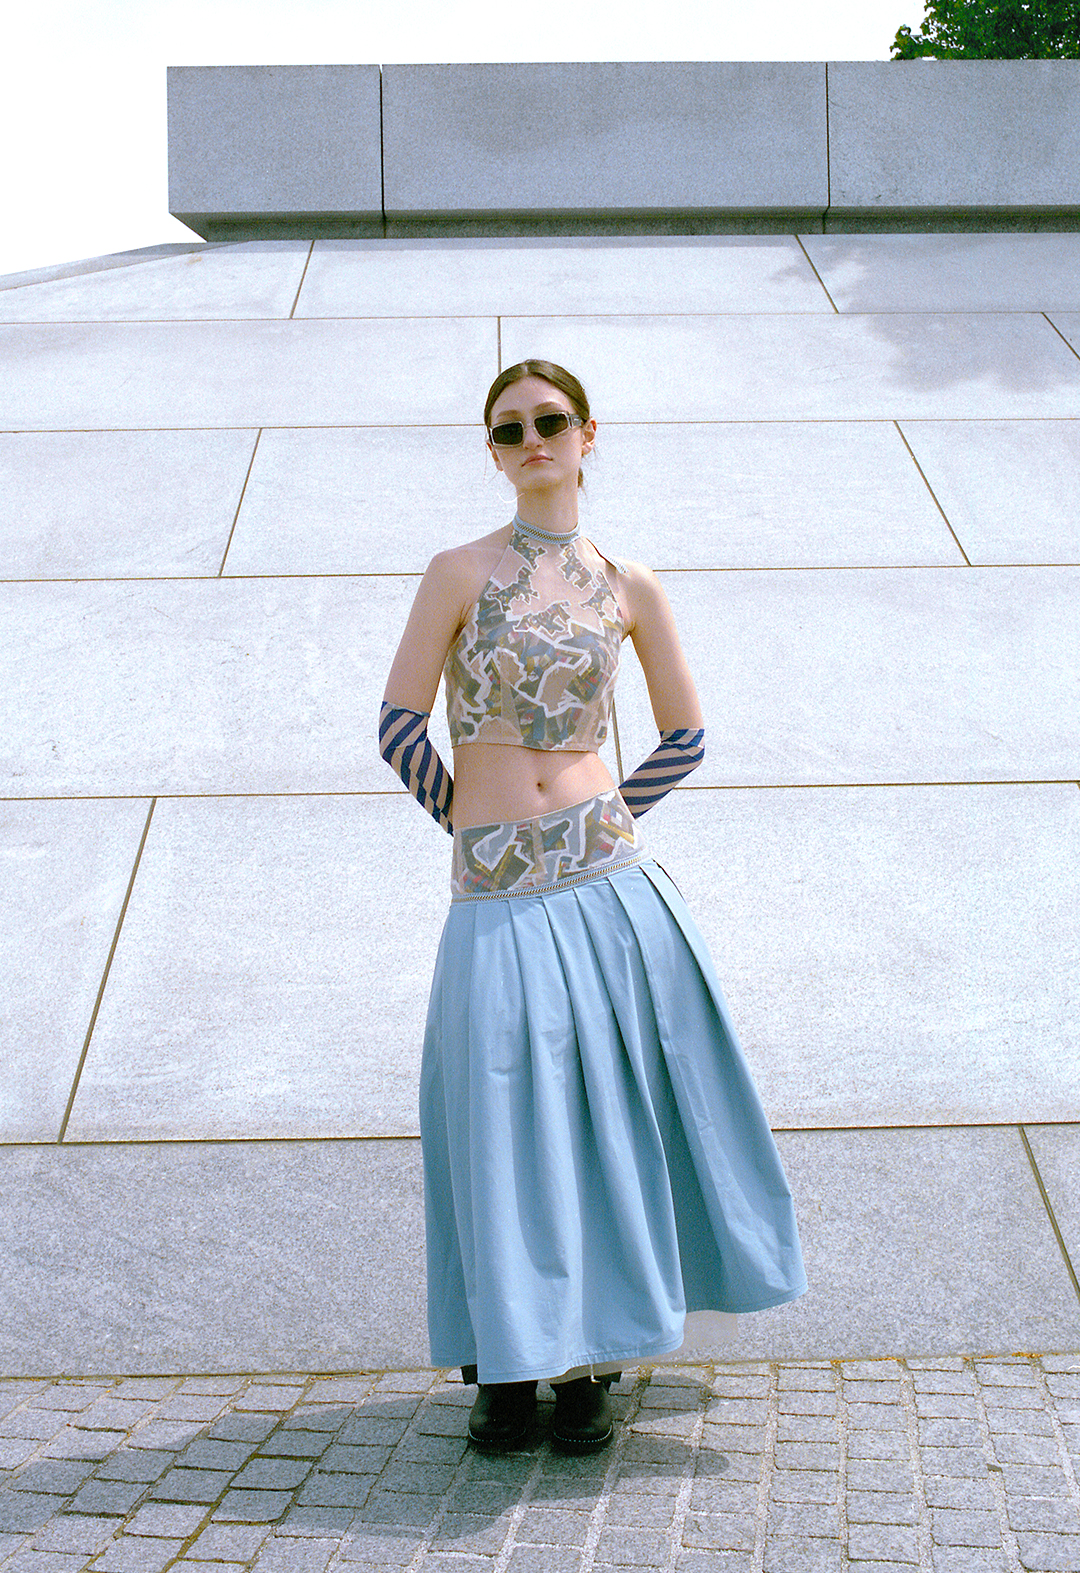 This two-piece set includes a halter neck crop top and knife pleat yoke skirt. The top and yoke parts are appliquéd with a patchwork digital print stitched between organza and mesh. Lacing detail on the back for opening. Accessorized with dark-blue mesh long-sleeved gloves and sunglasses. The model is posed in front of a gray wall.